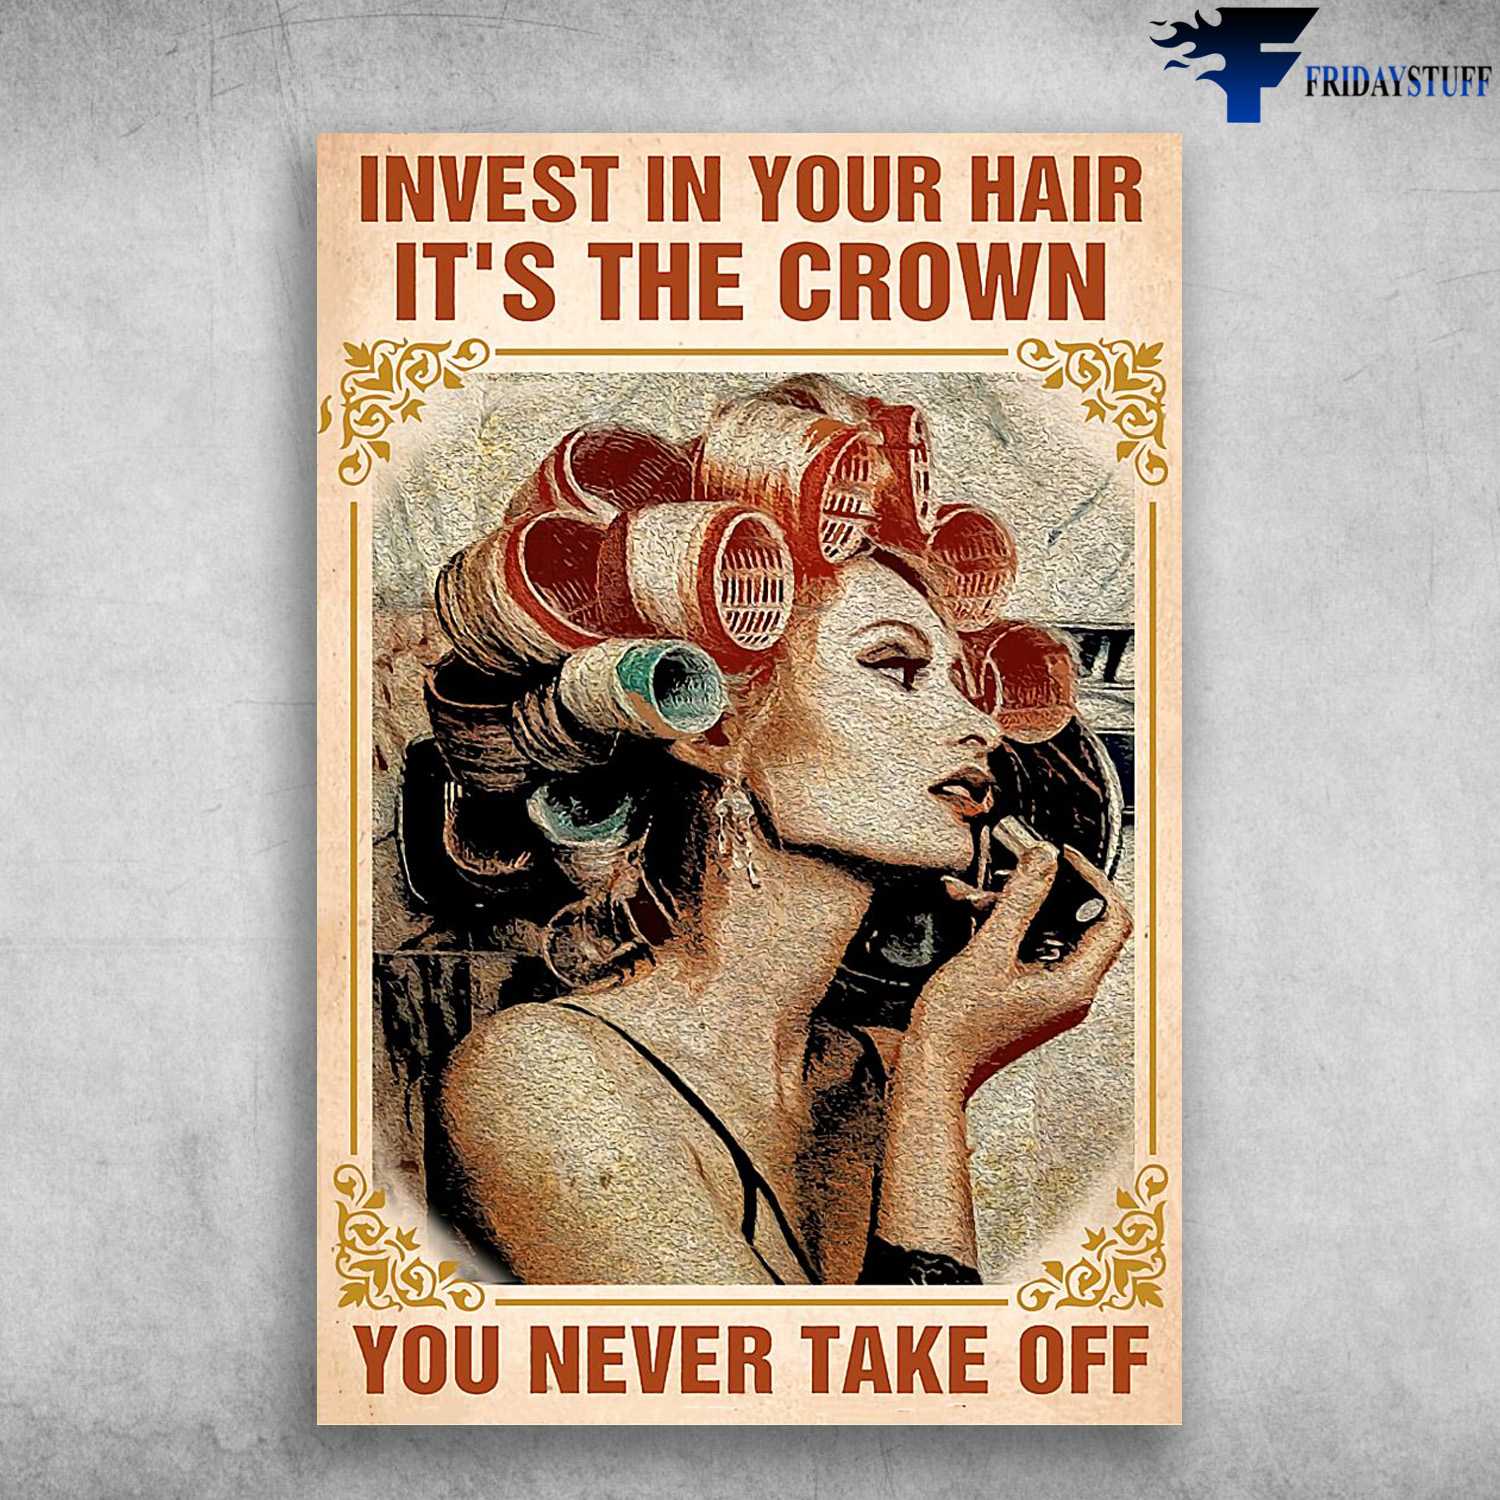 Hair Salon, Hairdresser Poster, Invest In Your Hair, It's The Crown, You Never Take Off